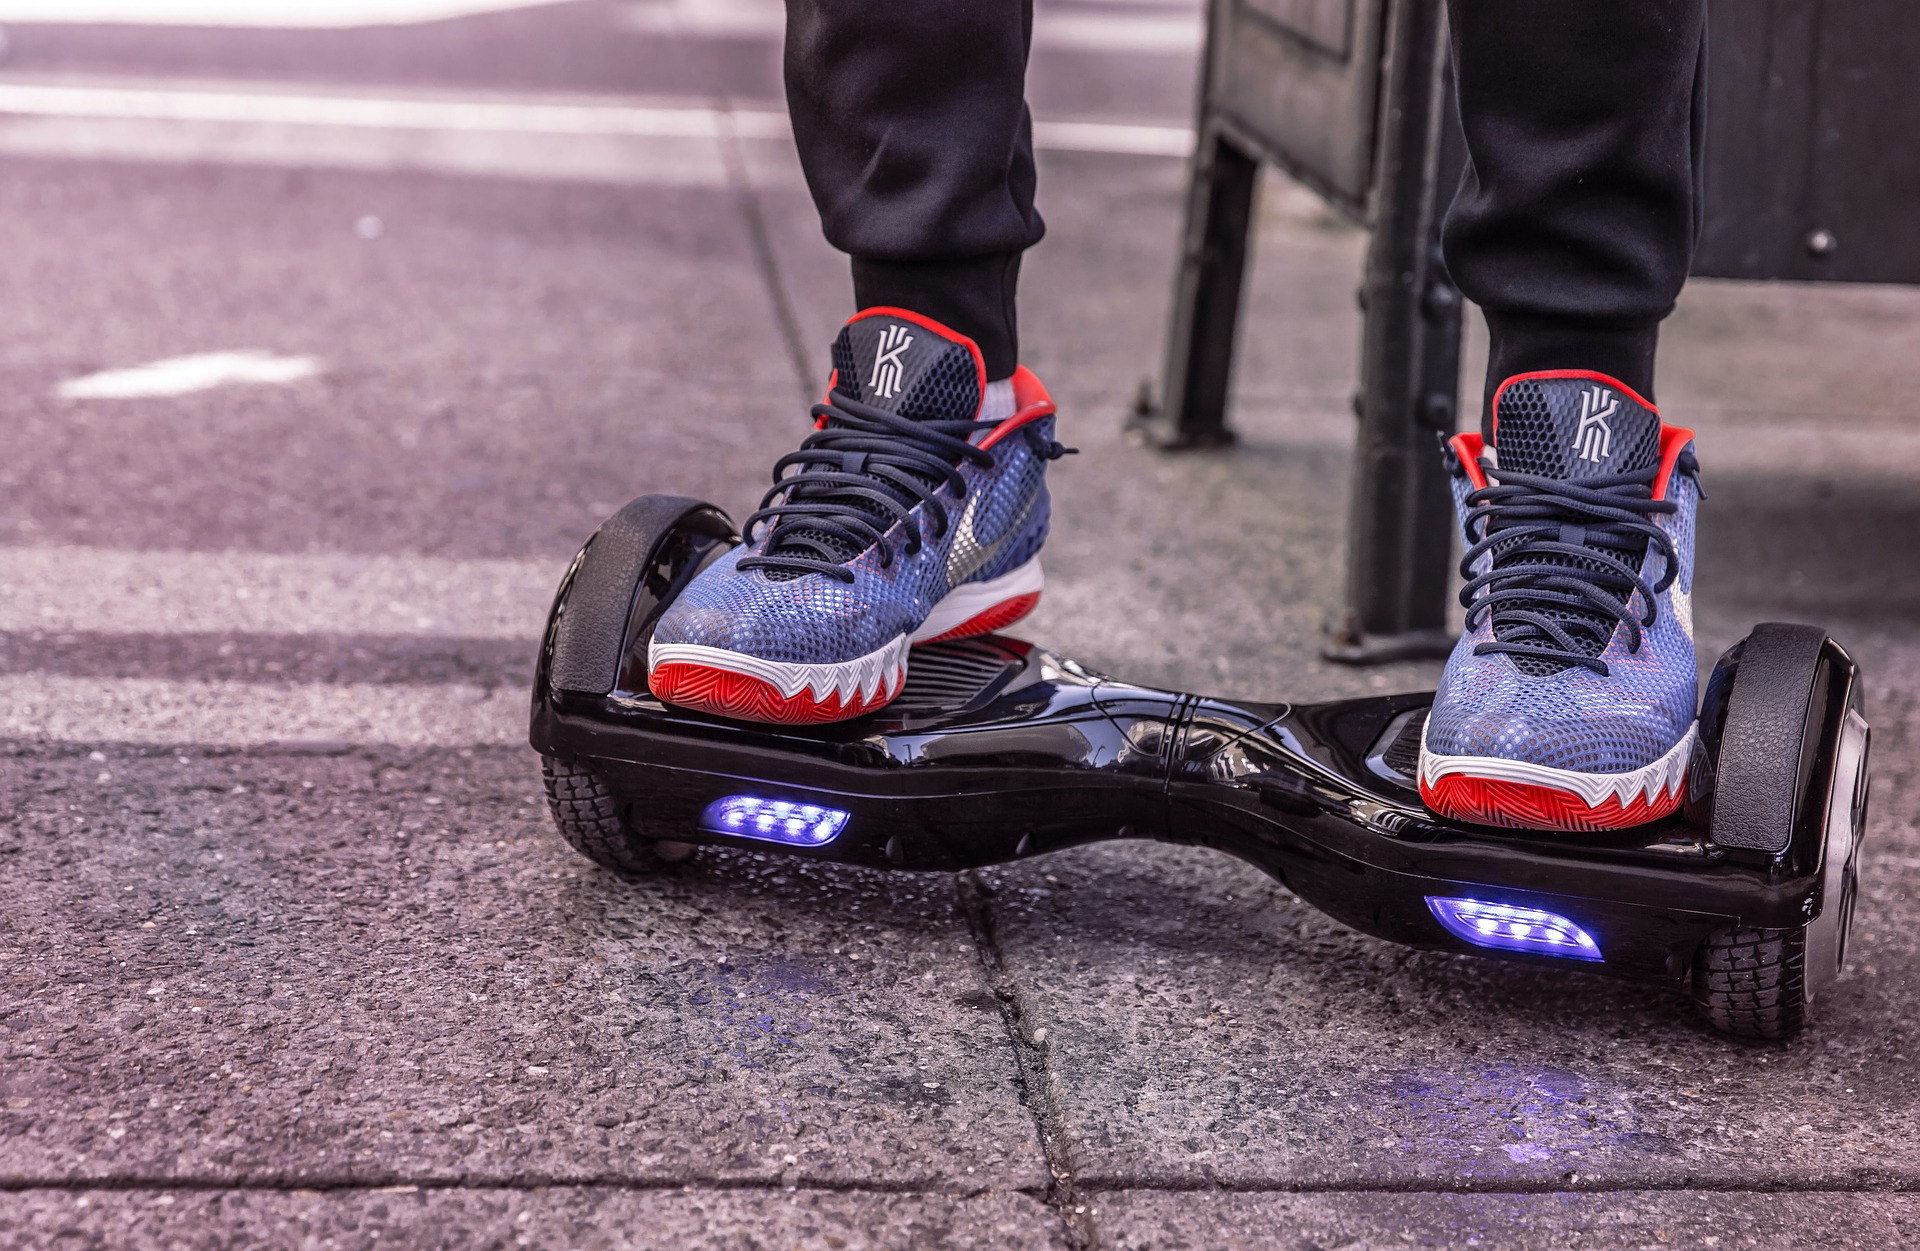 Modern day hoverboards: not quite as exciting as seen in movies. Pic: Pixabay.